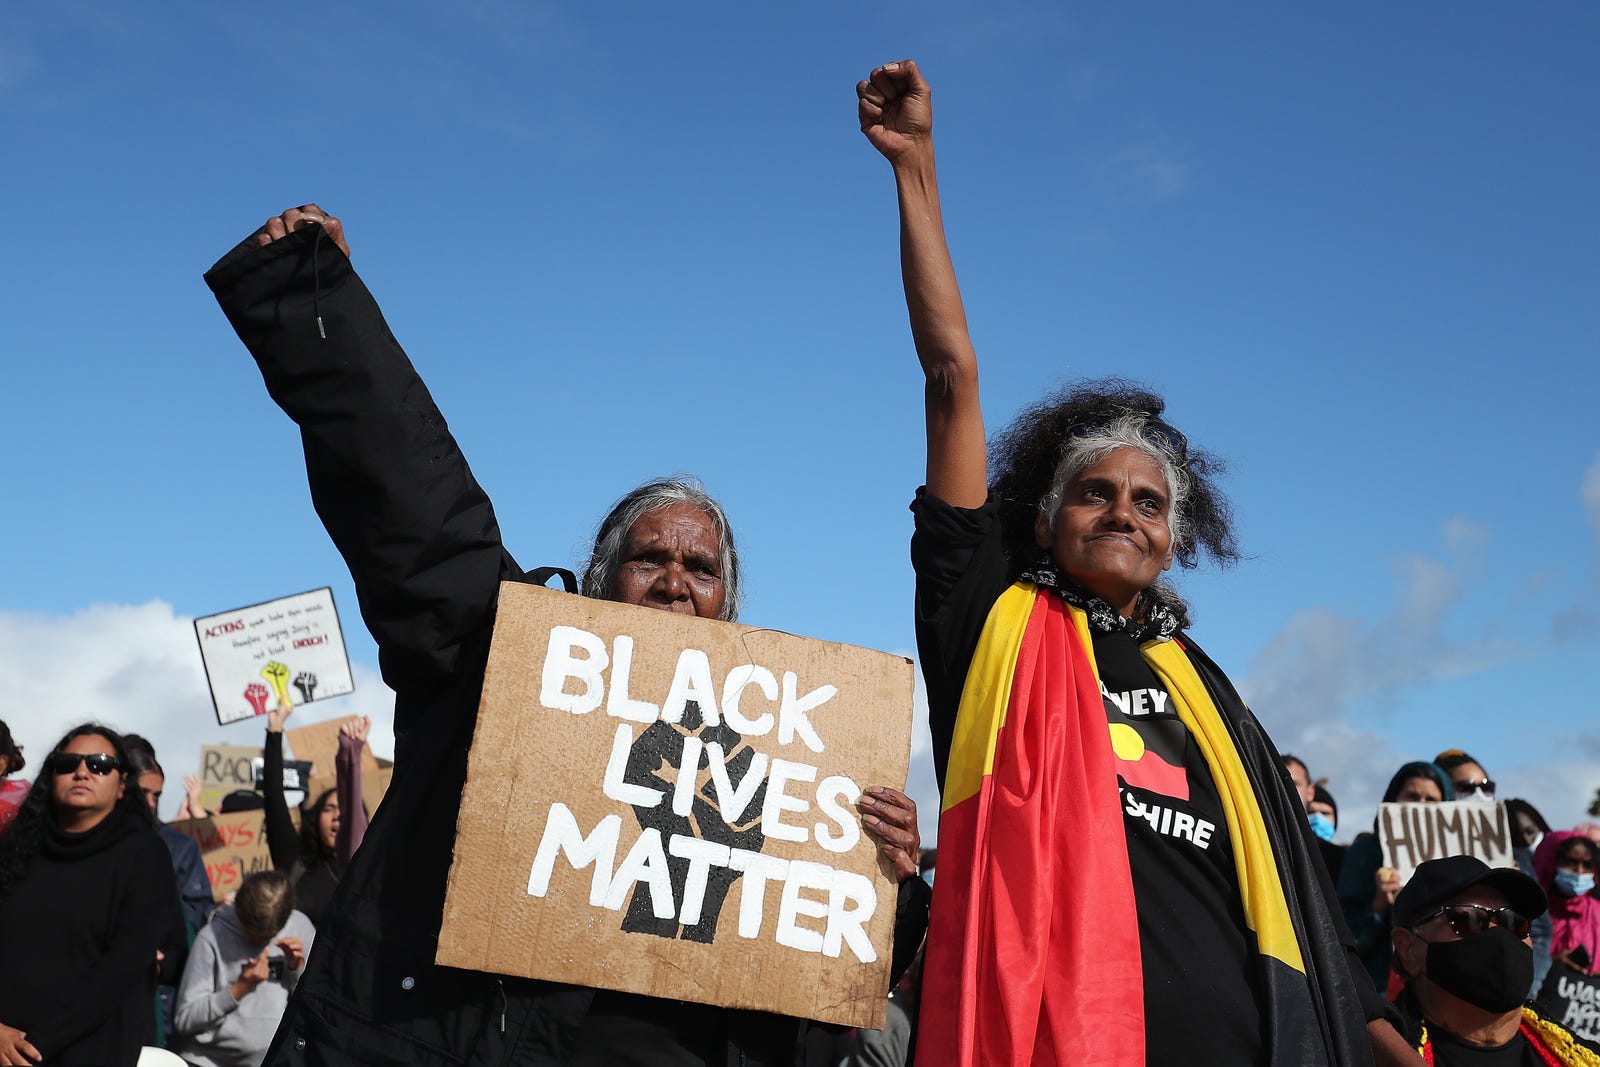 Protesters show their support during the Black Lives Matter Rally at Langley Park on June 13, 2020 in Perth, Australia.